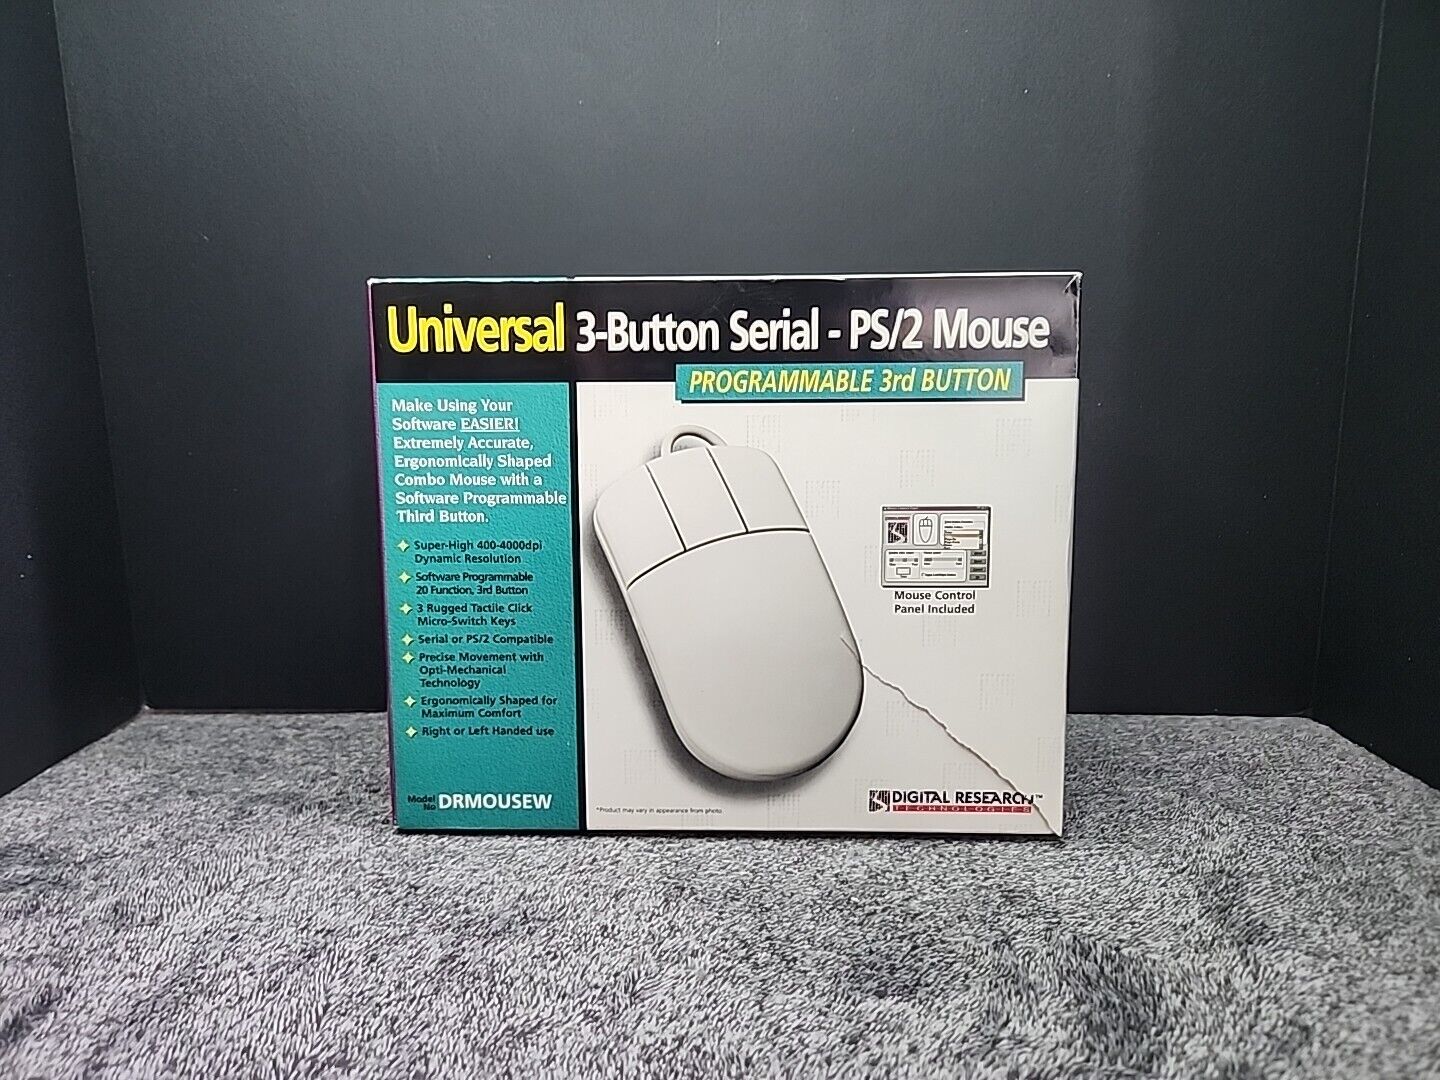 Vintage Digital Research Universal  3-Button Serial - PS/2 Mouse In Box